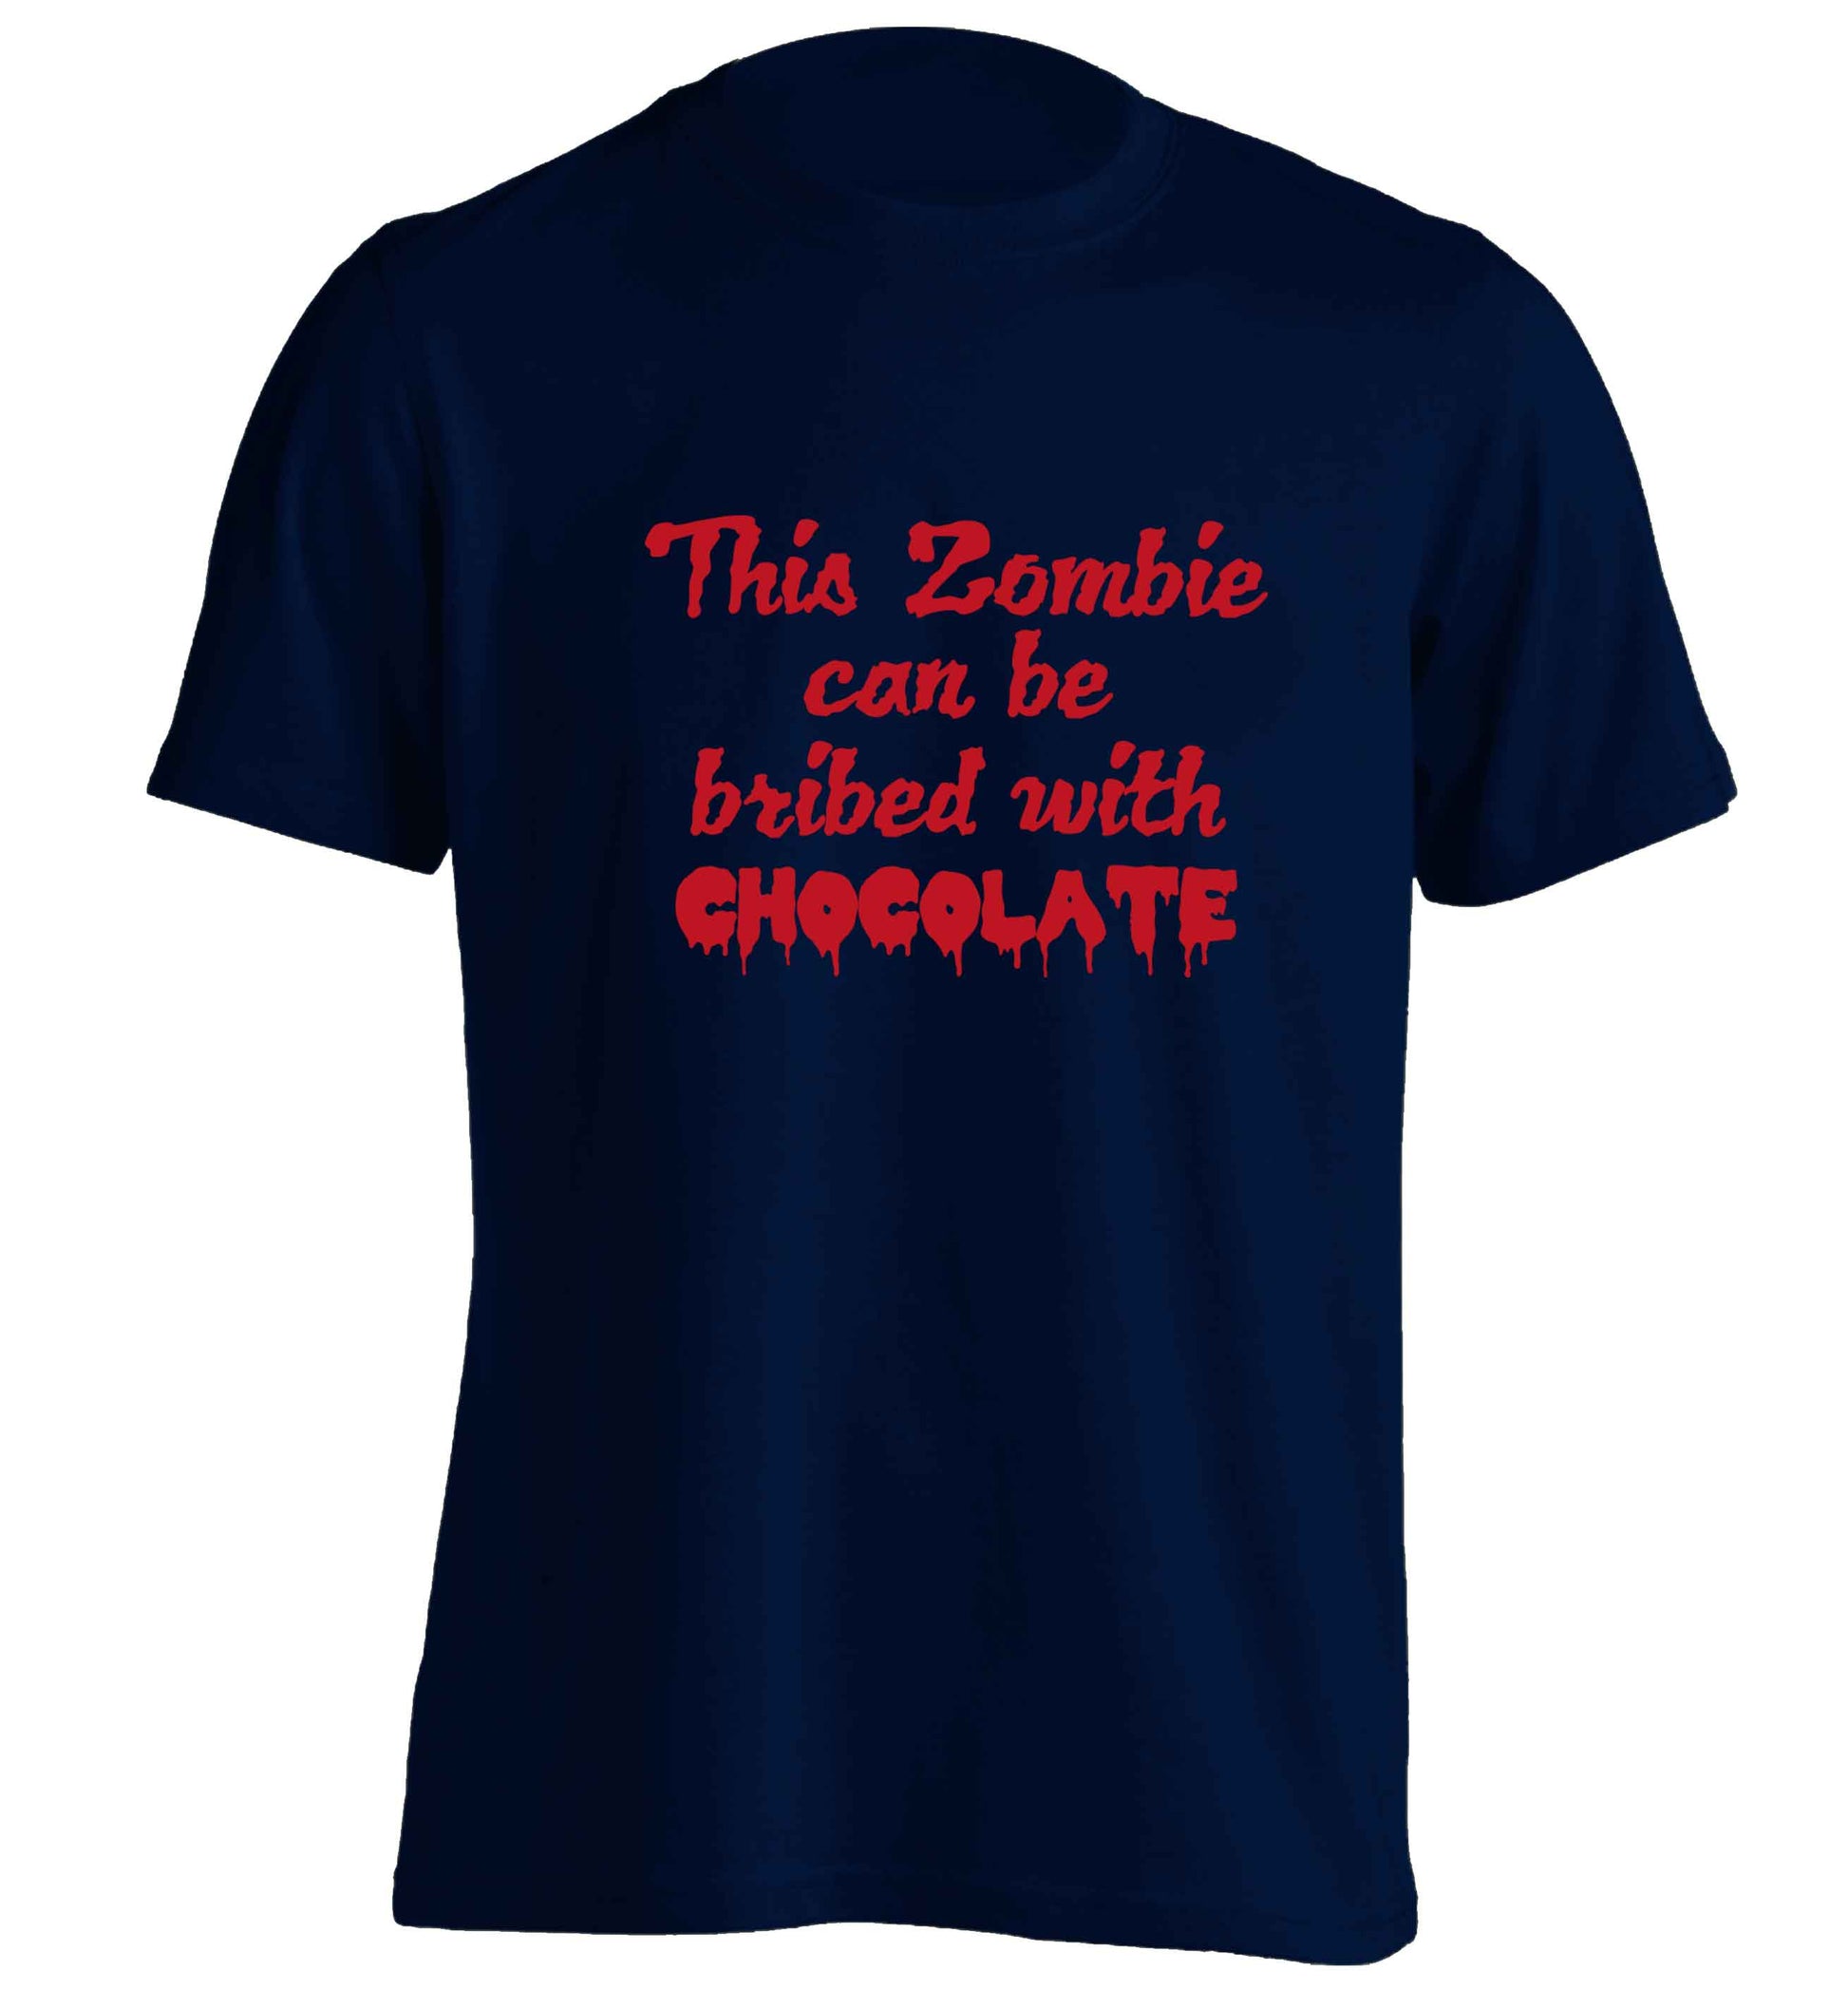 This zombie can be bribed with chocolate adults unisex navy Tshirt 2XL